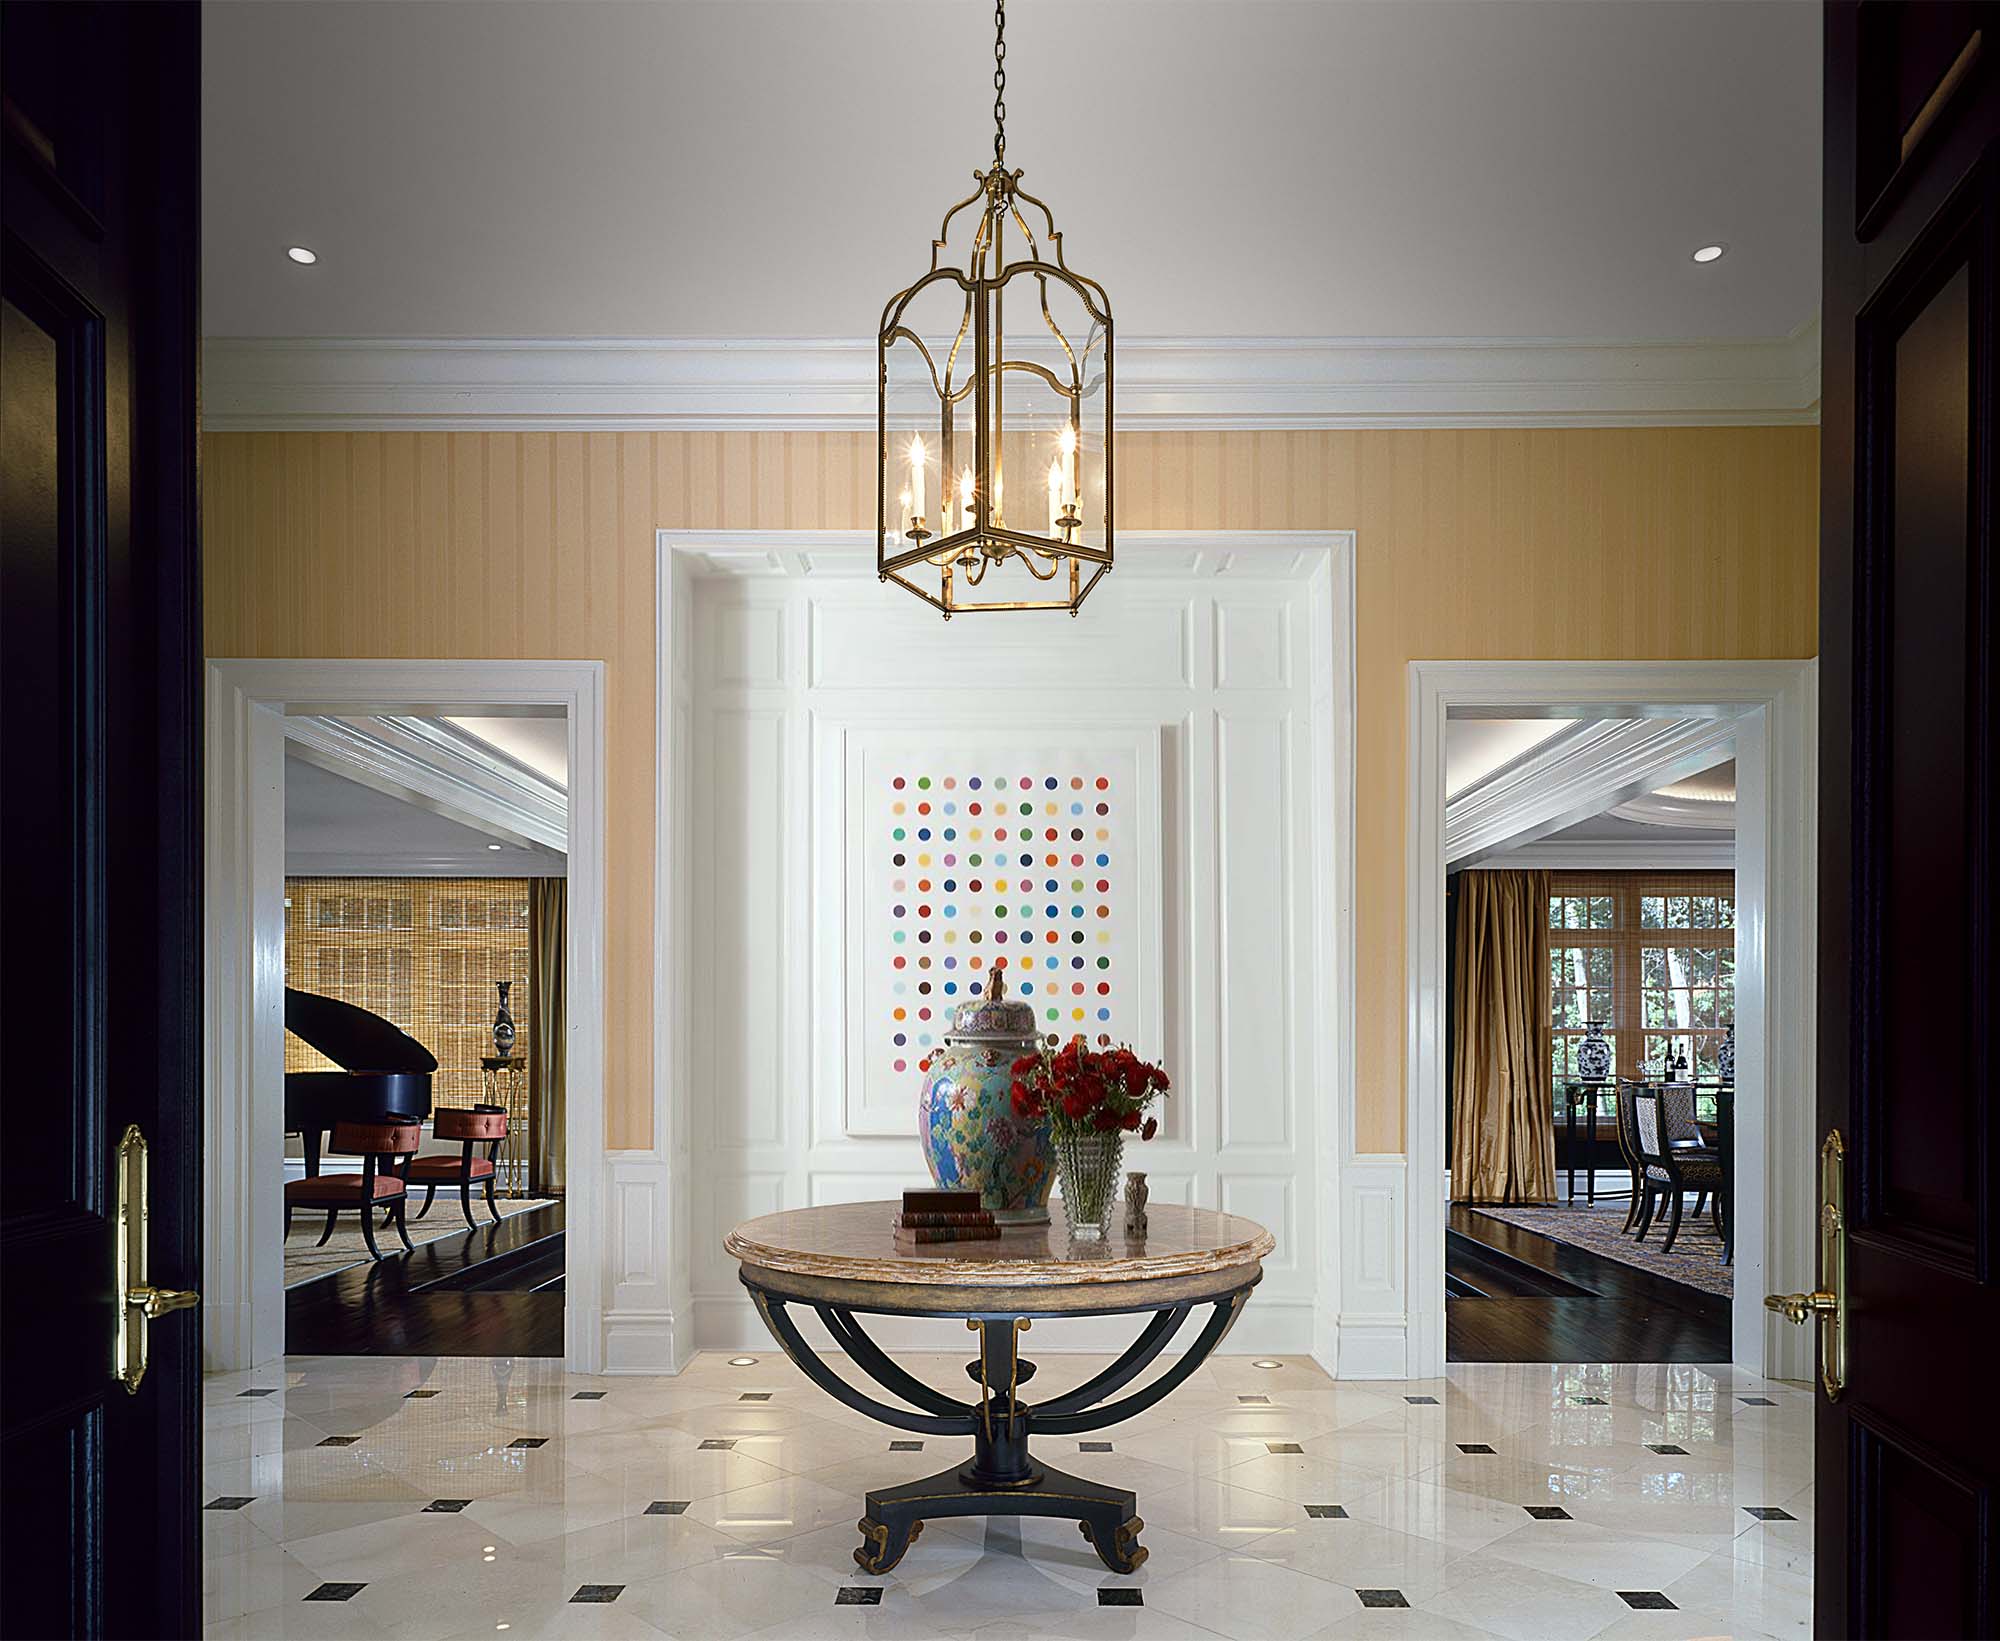 Entry Foyer with Damien Hirst art traditional millwork gold wallpaper dining room piano tile floor